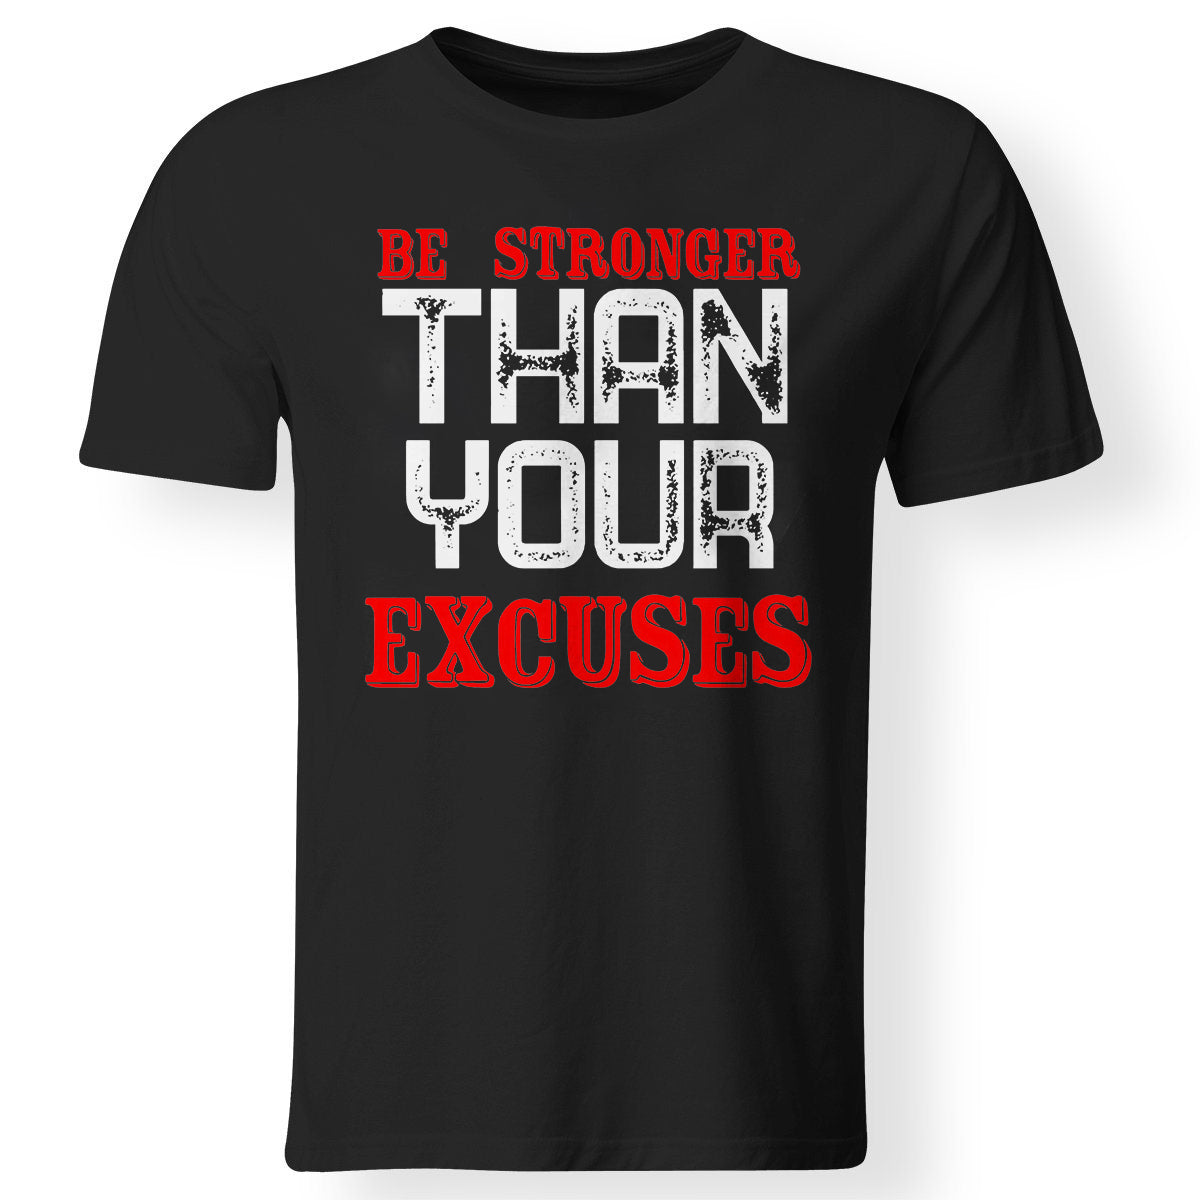 Be Stronger Than You Excuses Printed T-shirt